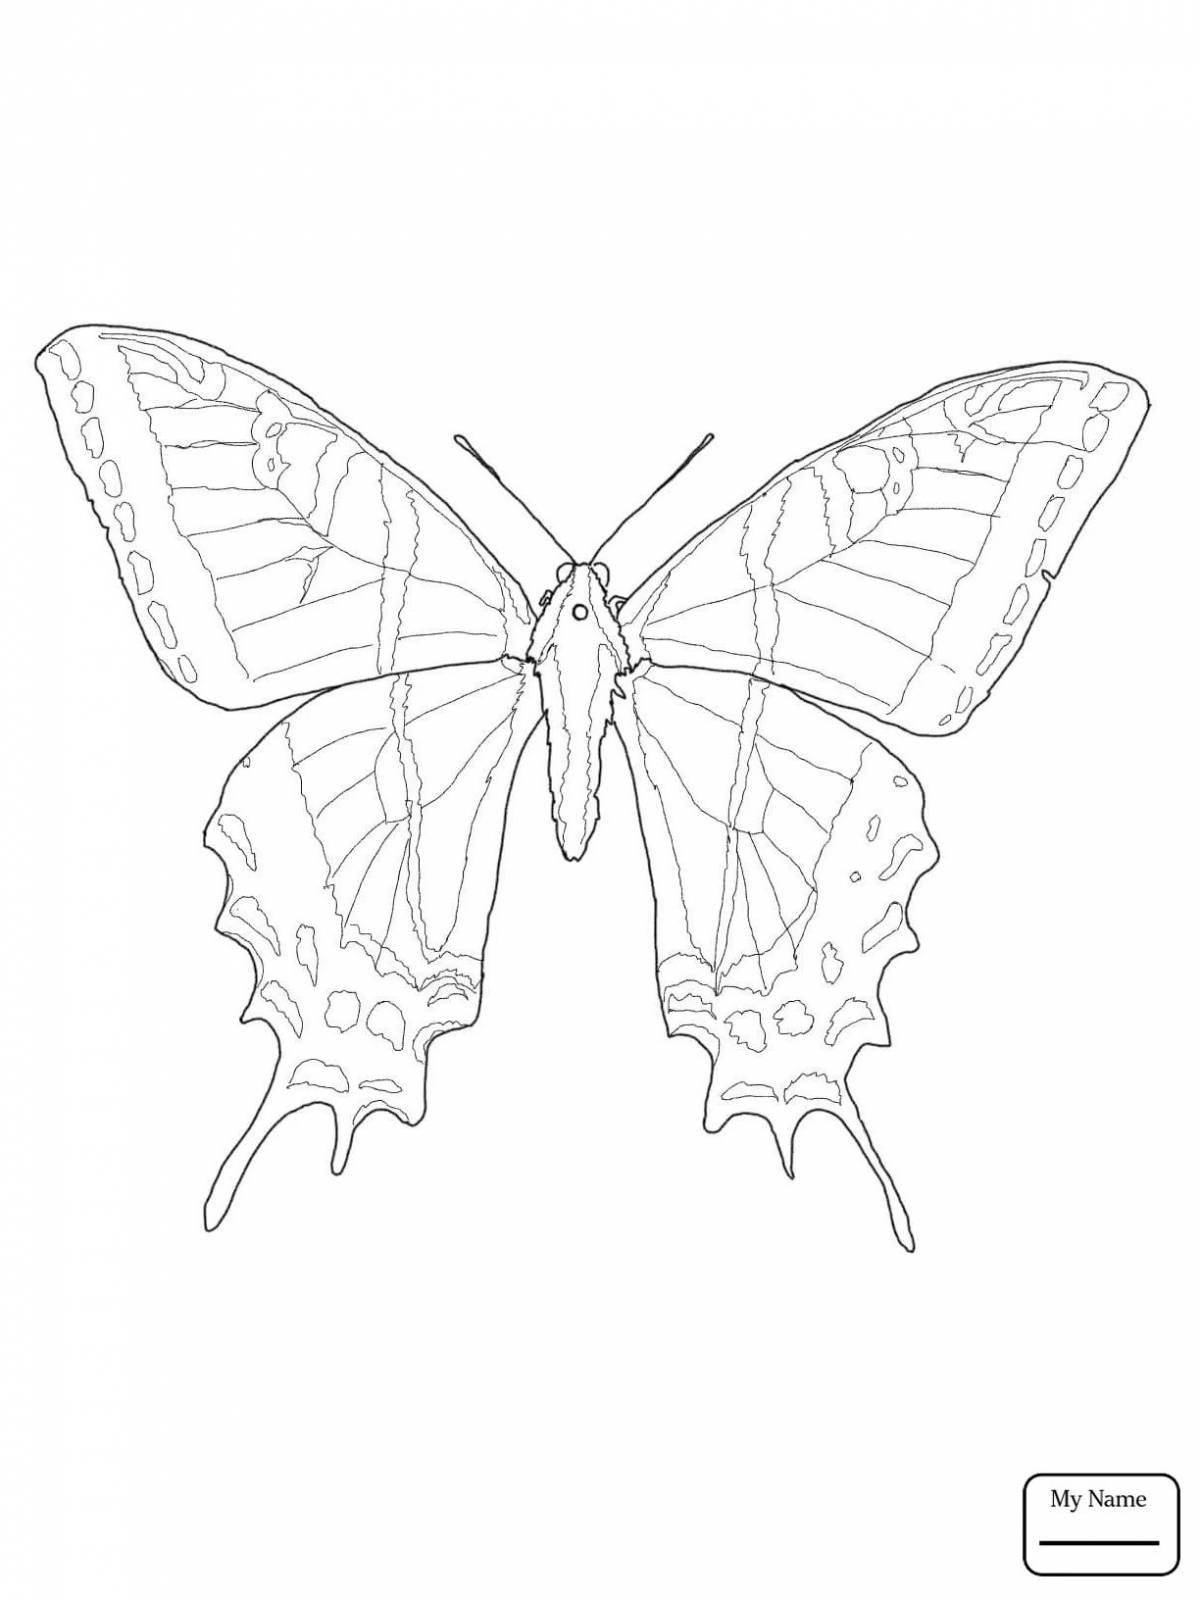 Awesome swallowtail coloring page